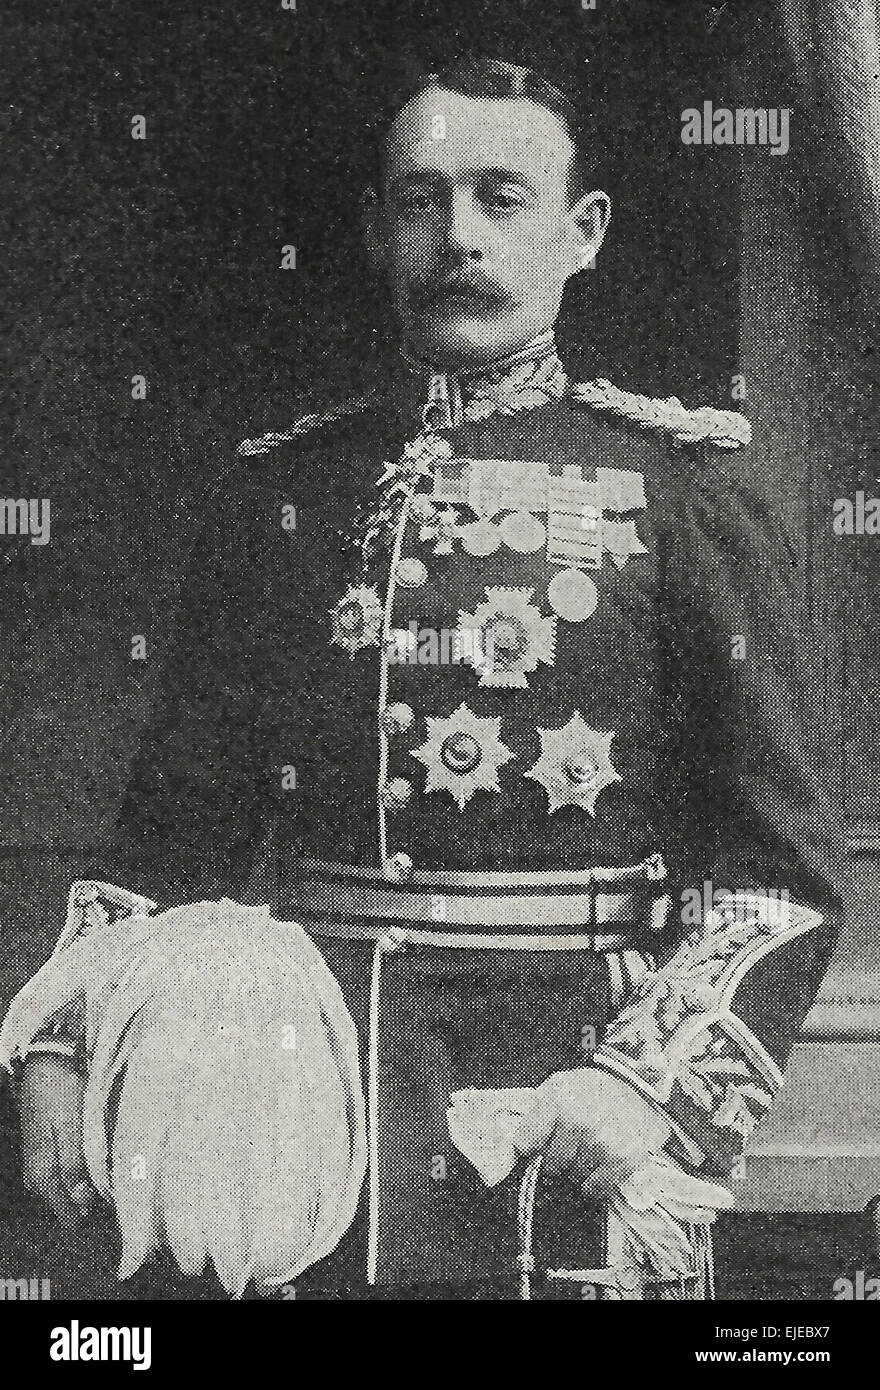 General Sir Archibald Hunter at the time of the Second Boer War, circa 1900 Stock Photo